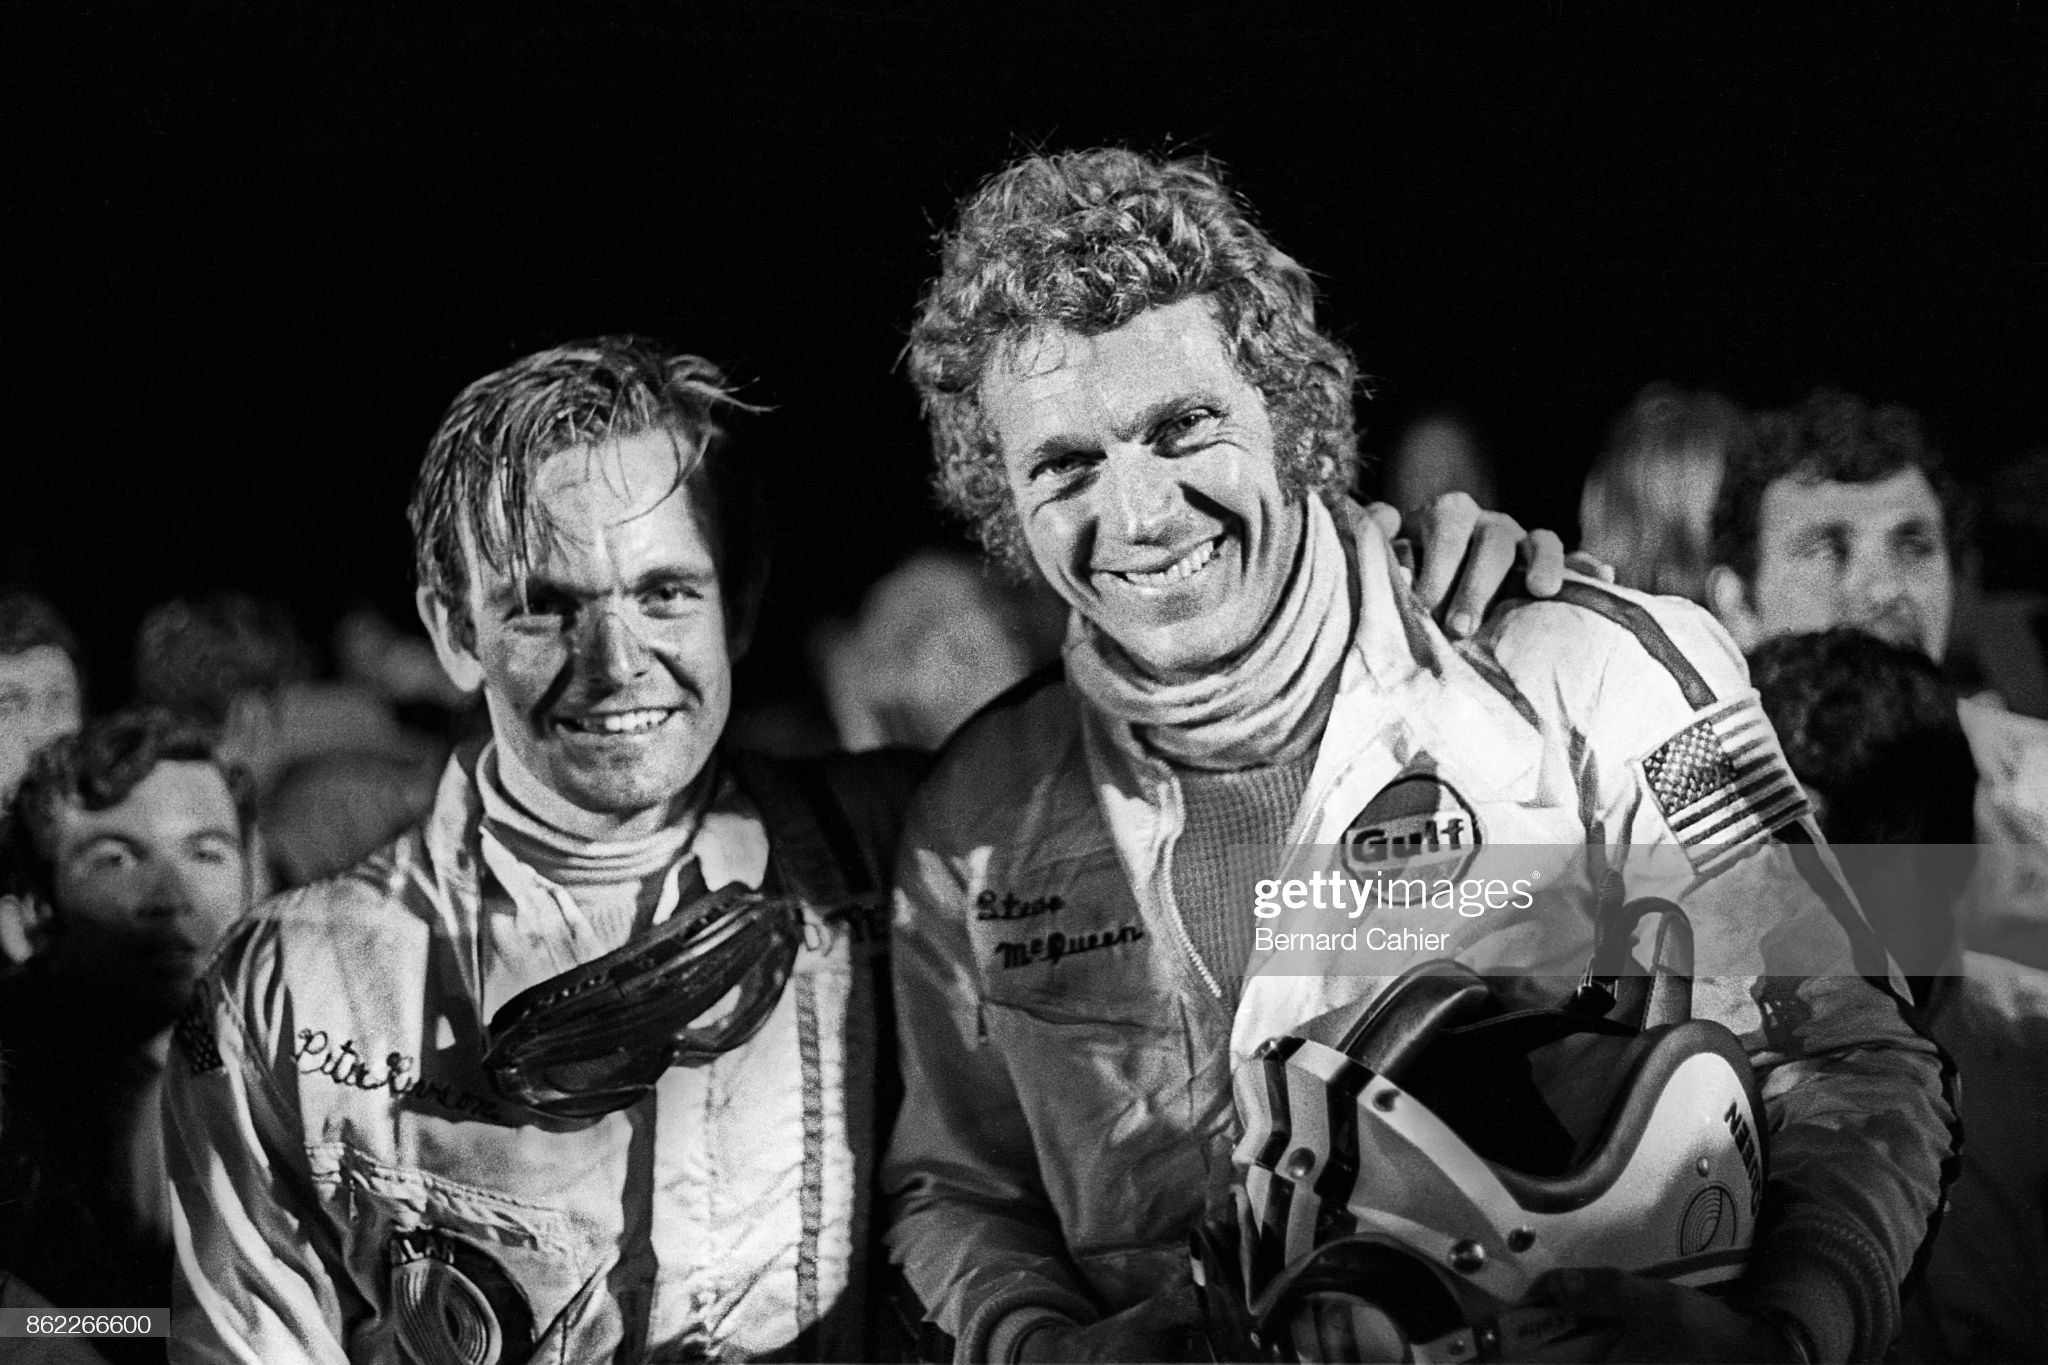 Peter Revson and Steve McQueen at the finish of the 12 Hours of Sebring.